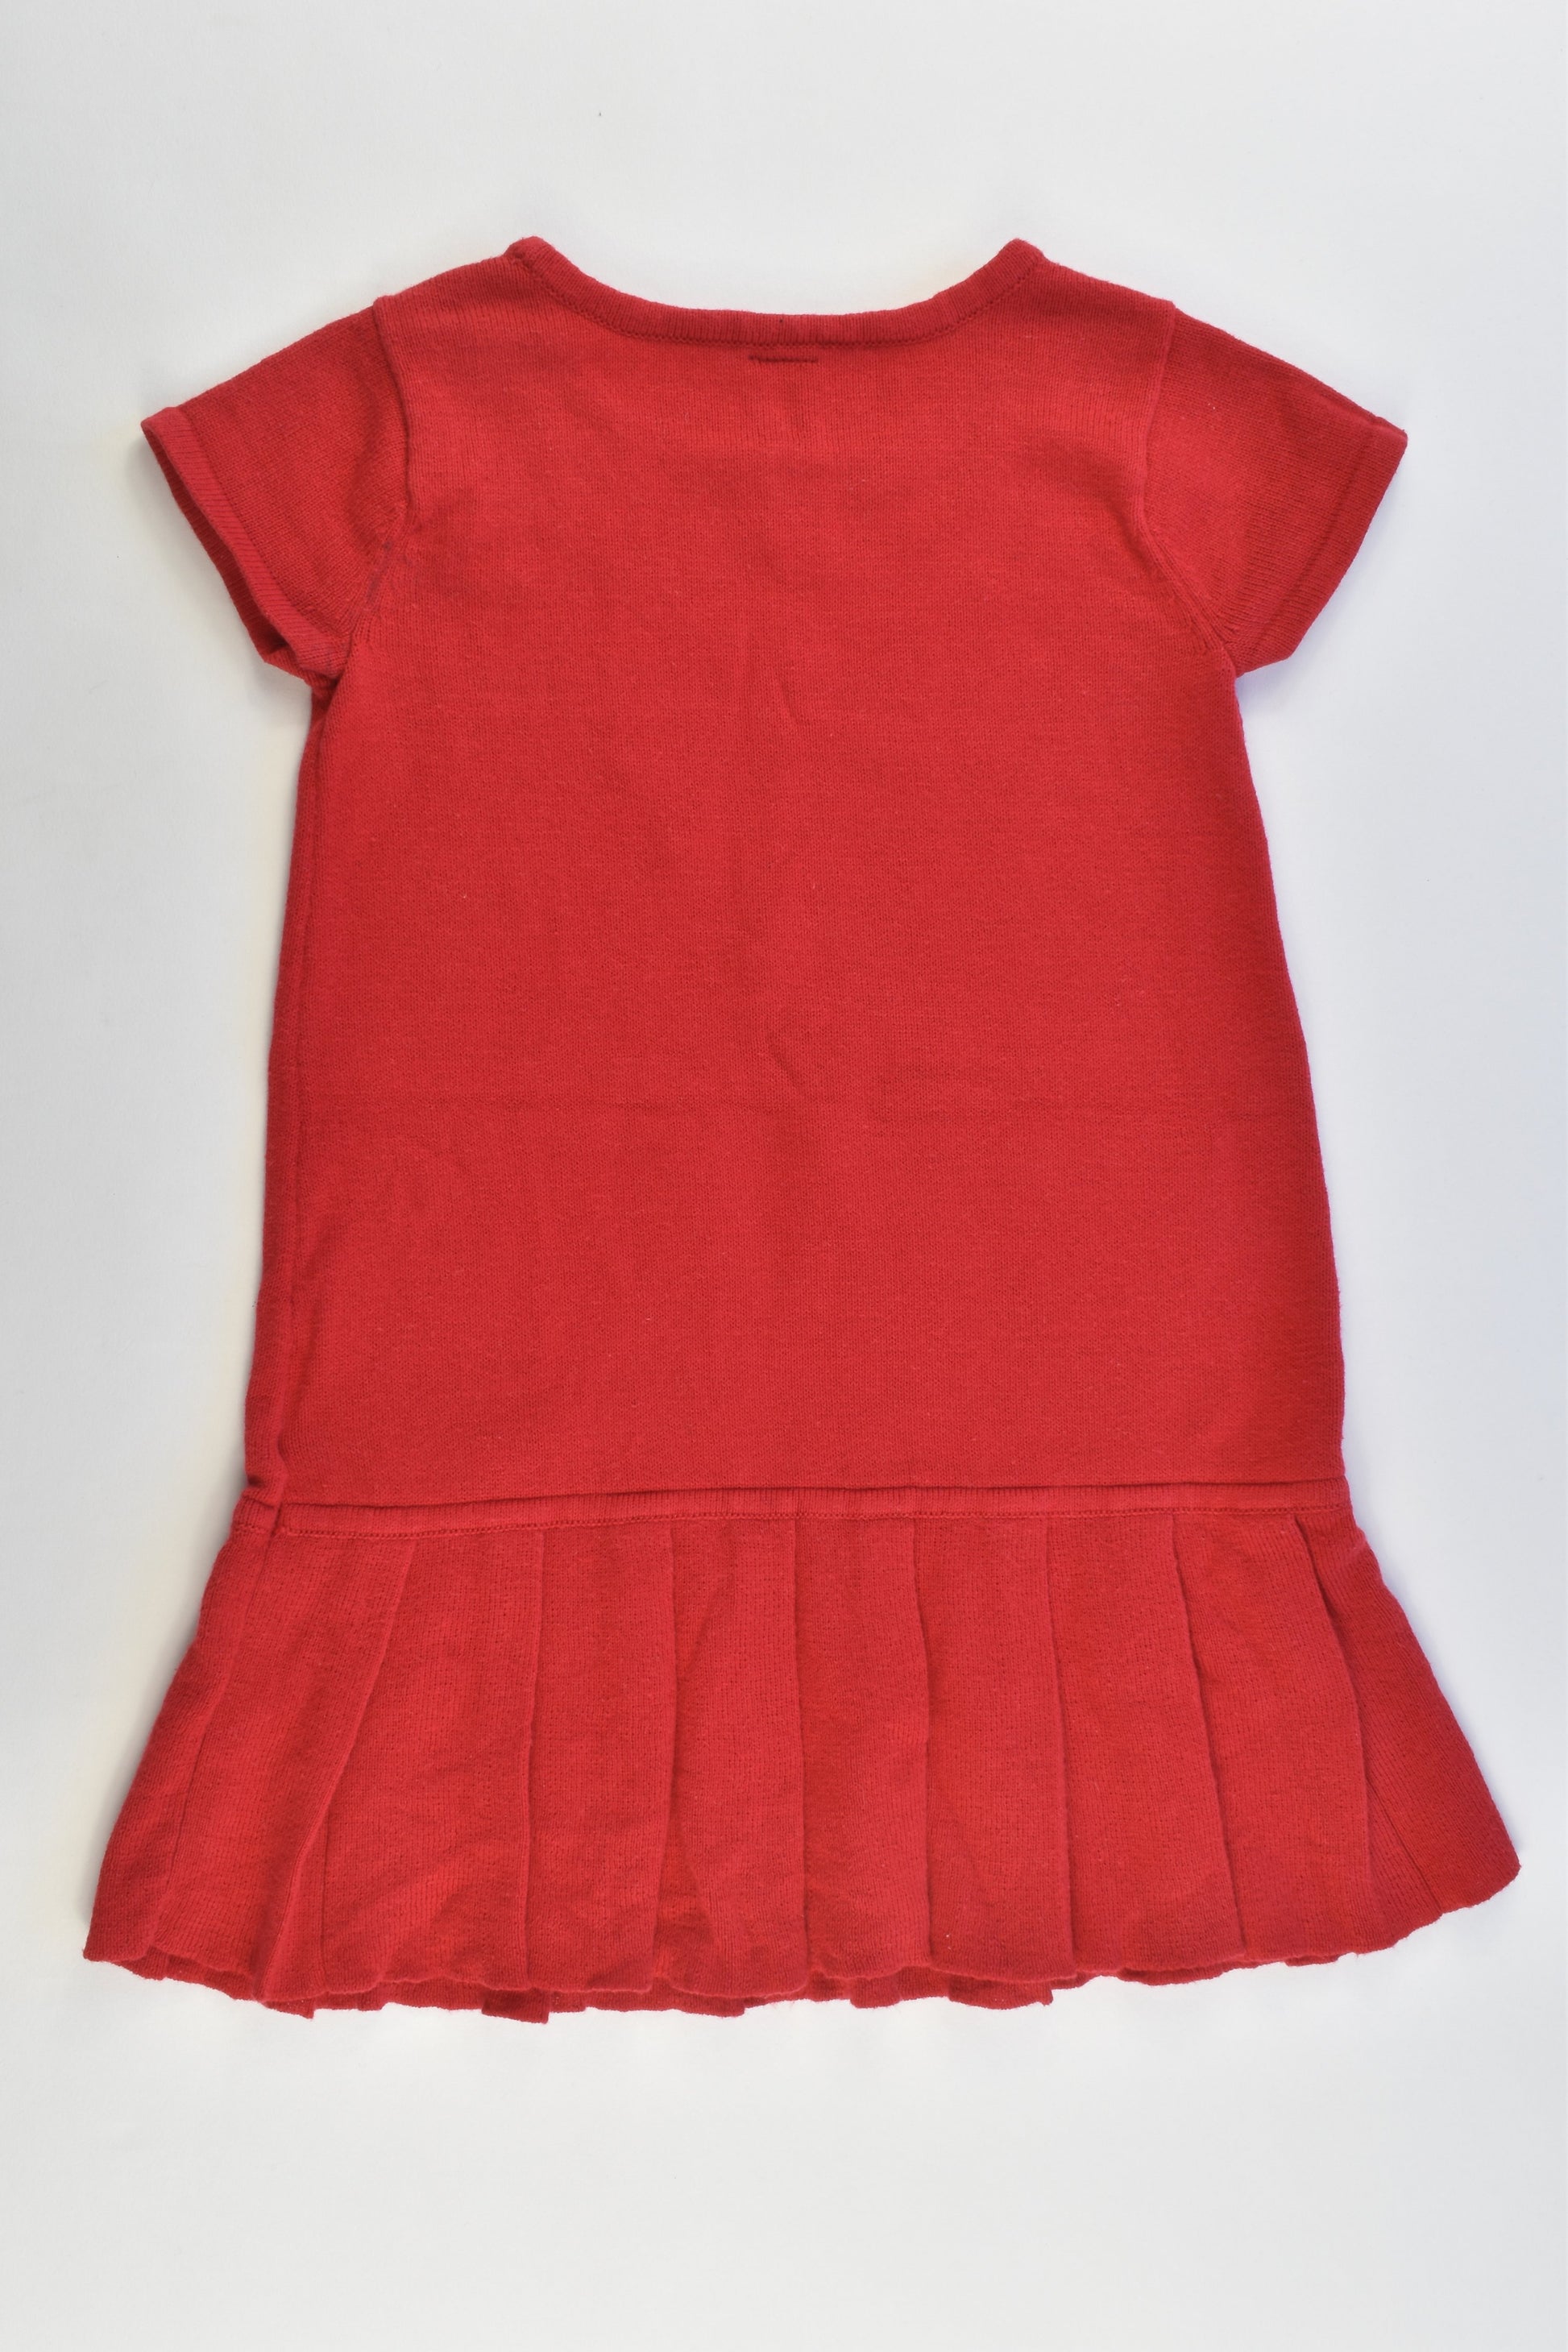 Baby Gap Size 2 years Knitted Dress